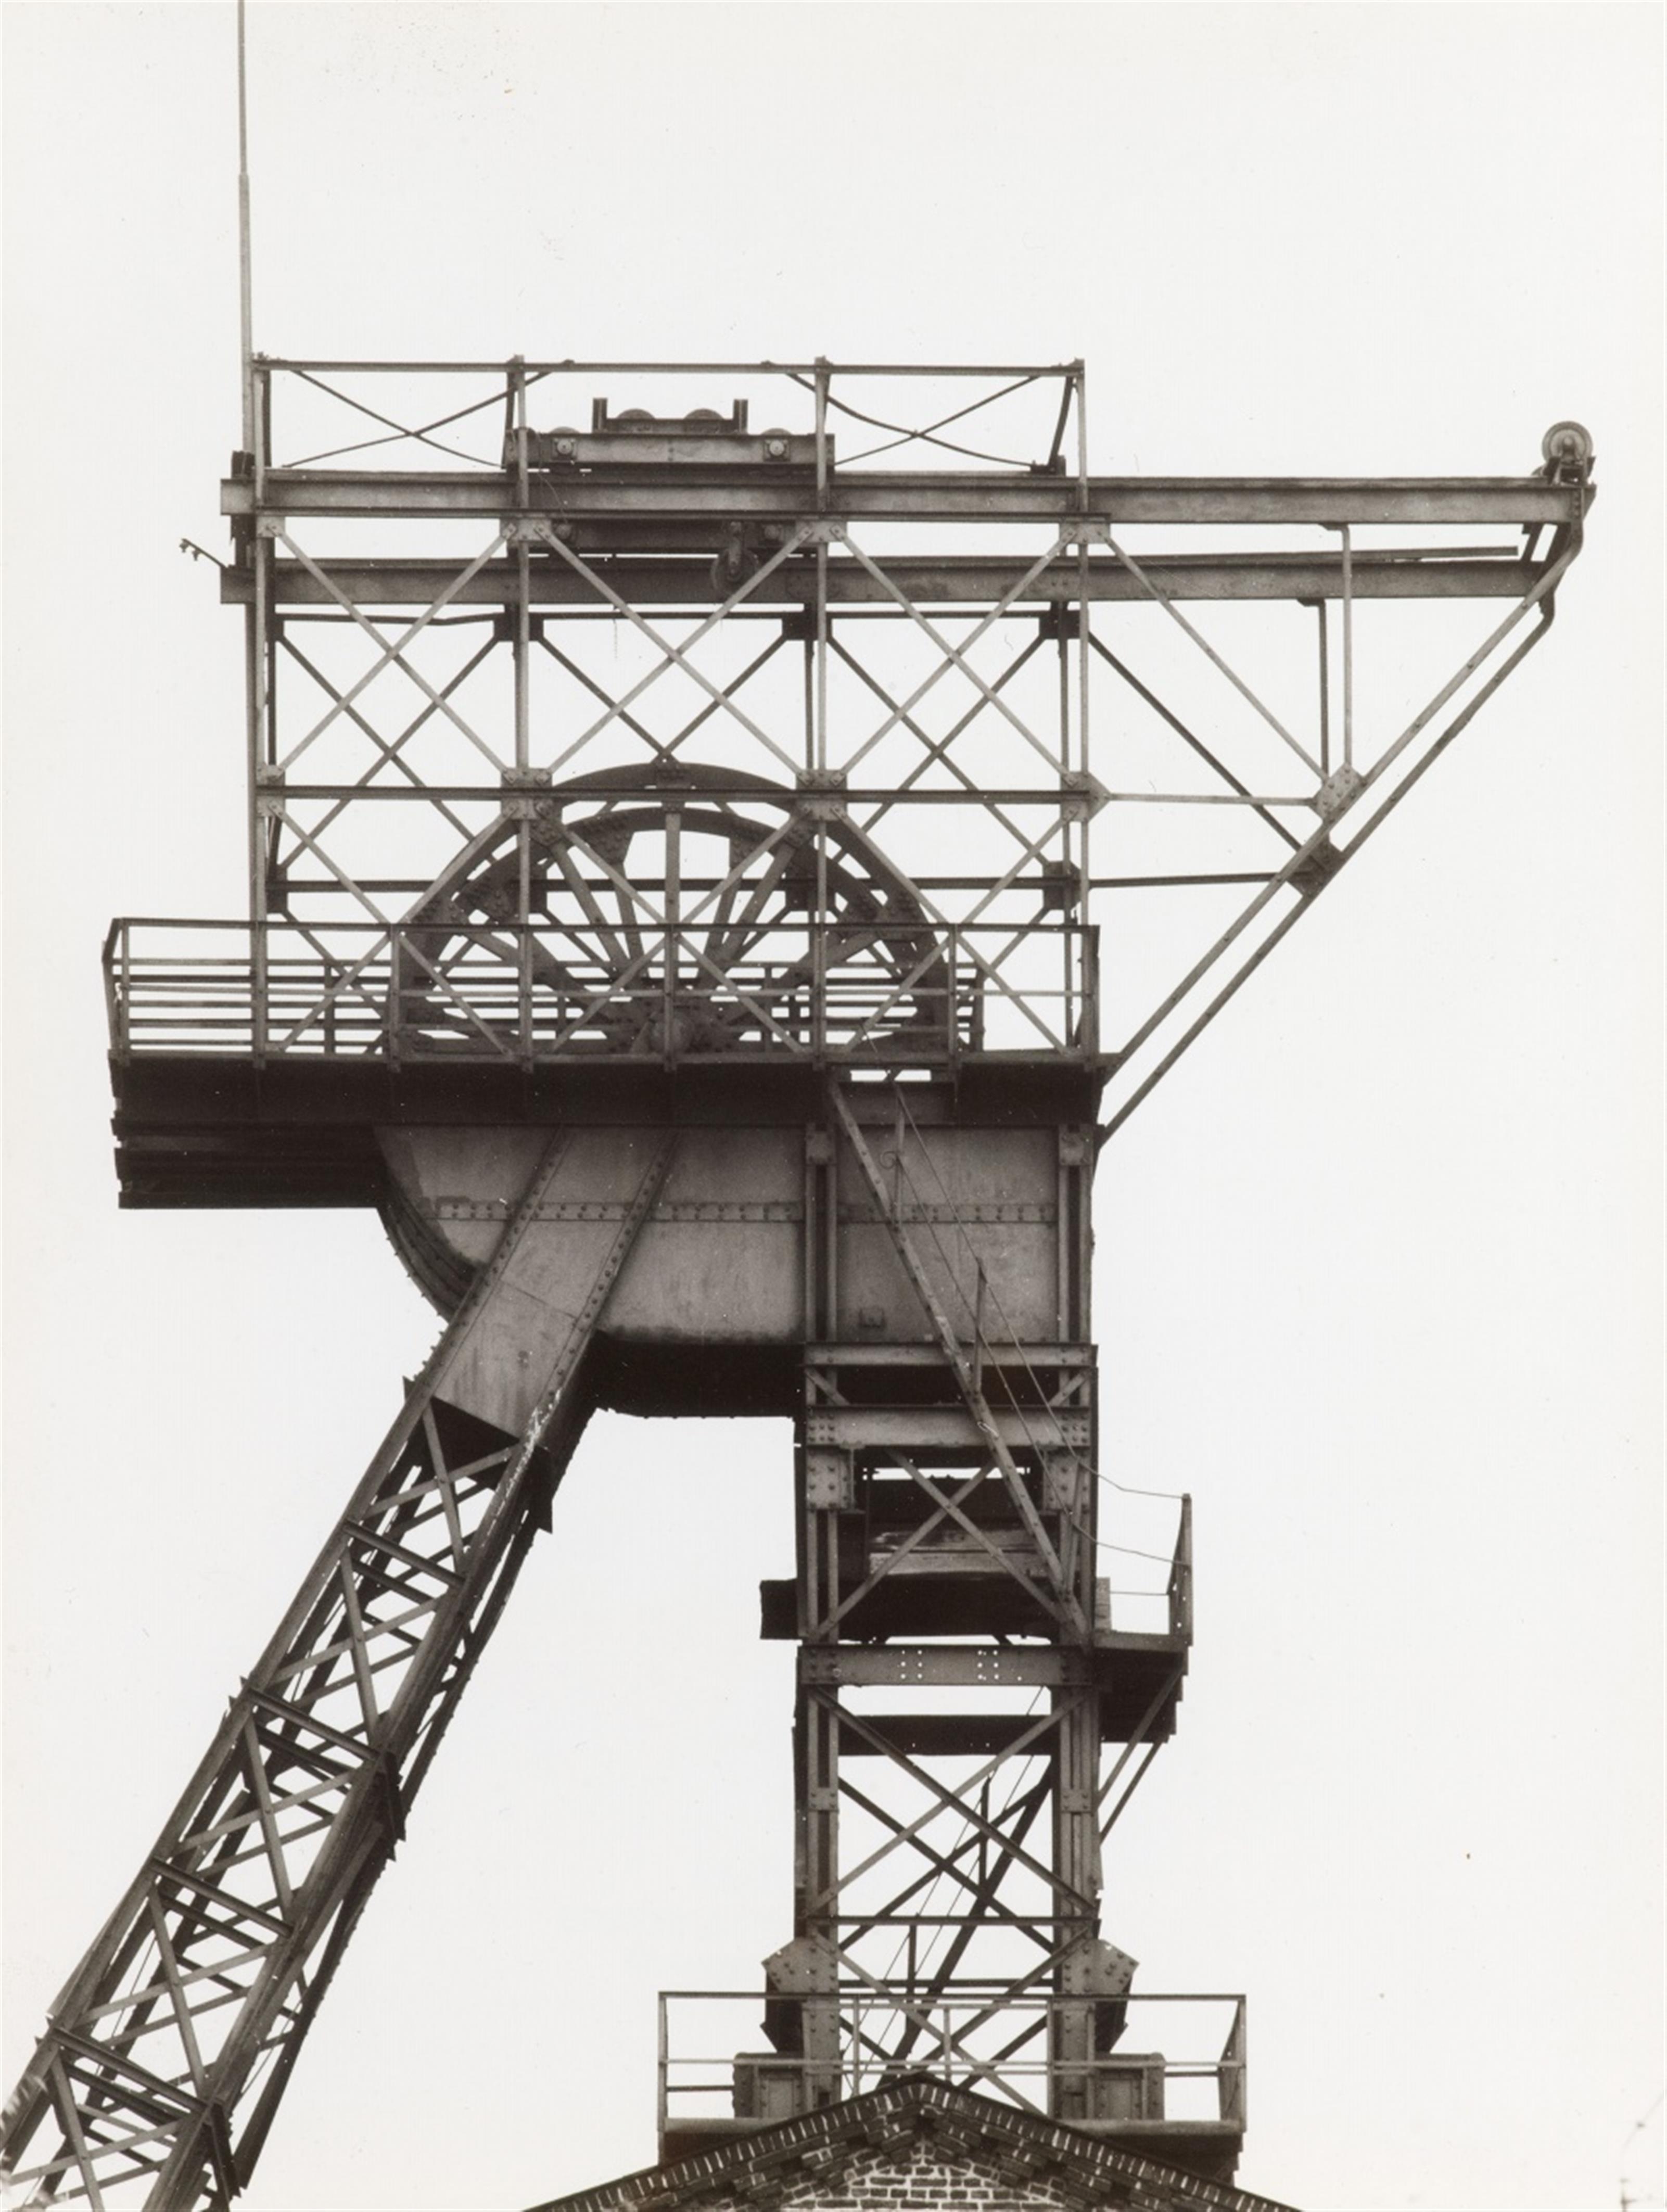 Bernd and Hilla Becher - Winding towers - image-5